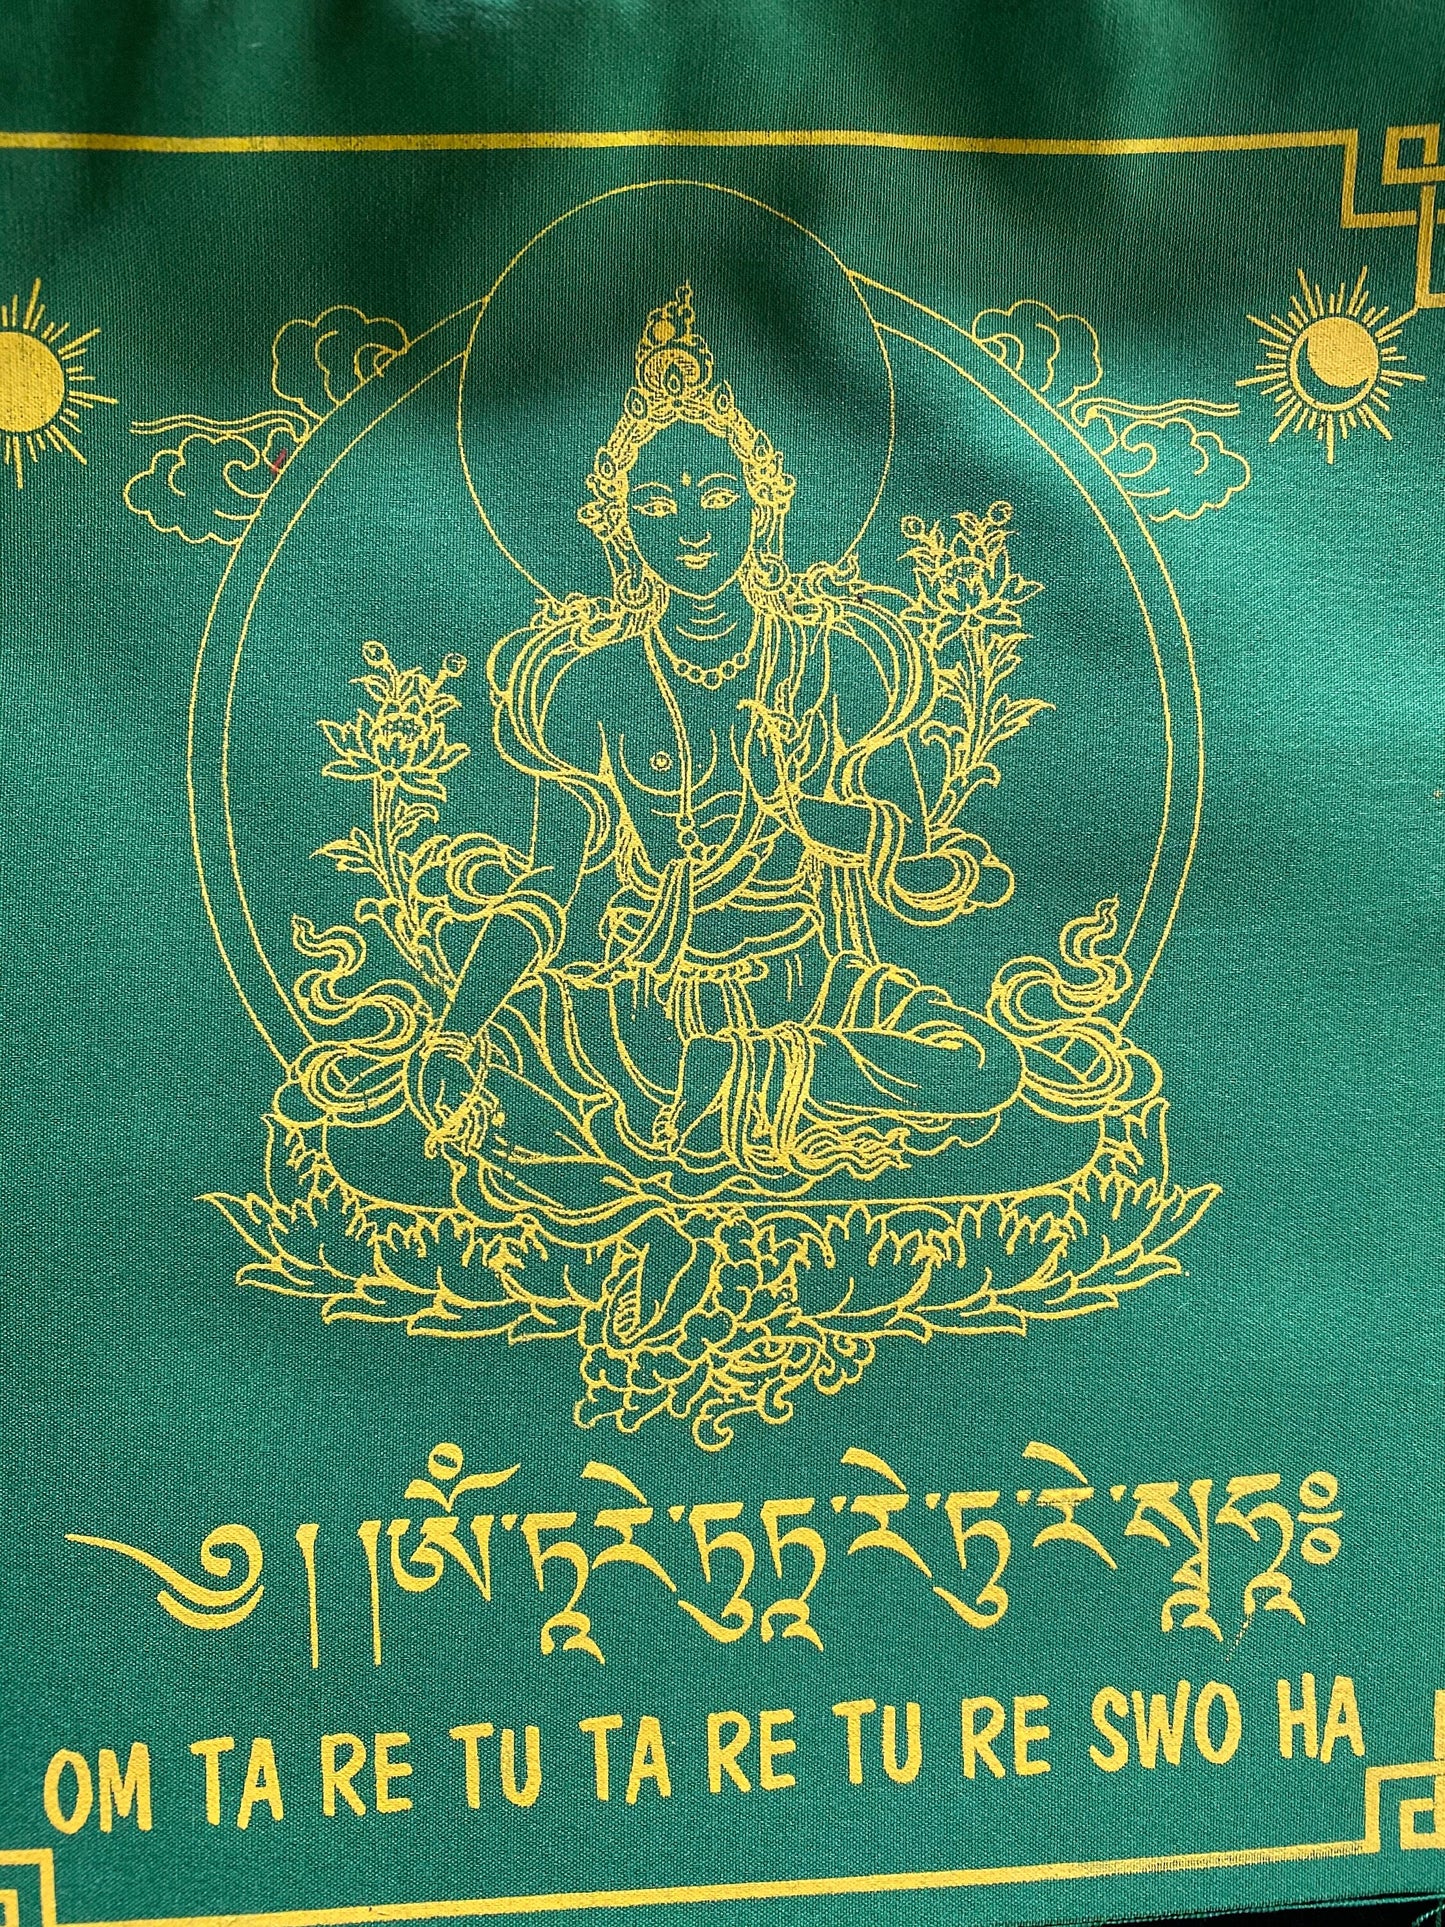 High-quality Tibetan prayer flags: Close-up of 1 Green Tara flag from a set of 10, 8x8 inches each, colored green, imprinted with her image in yellow ink.